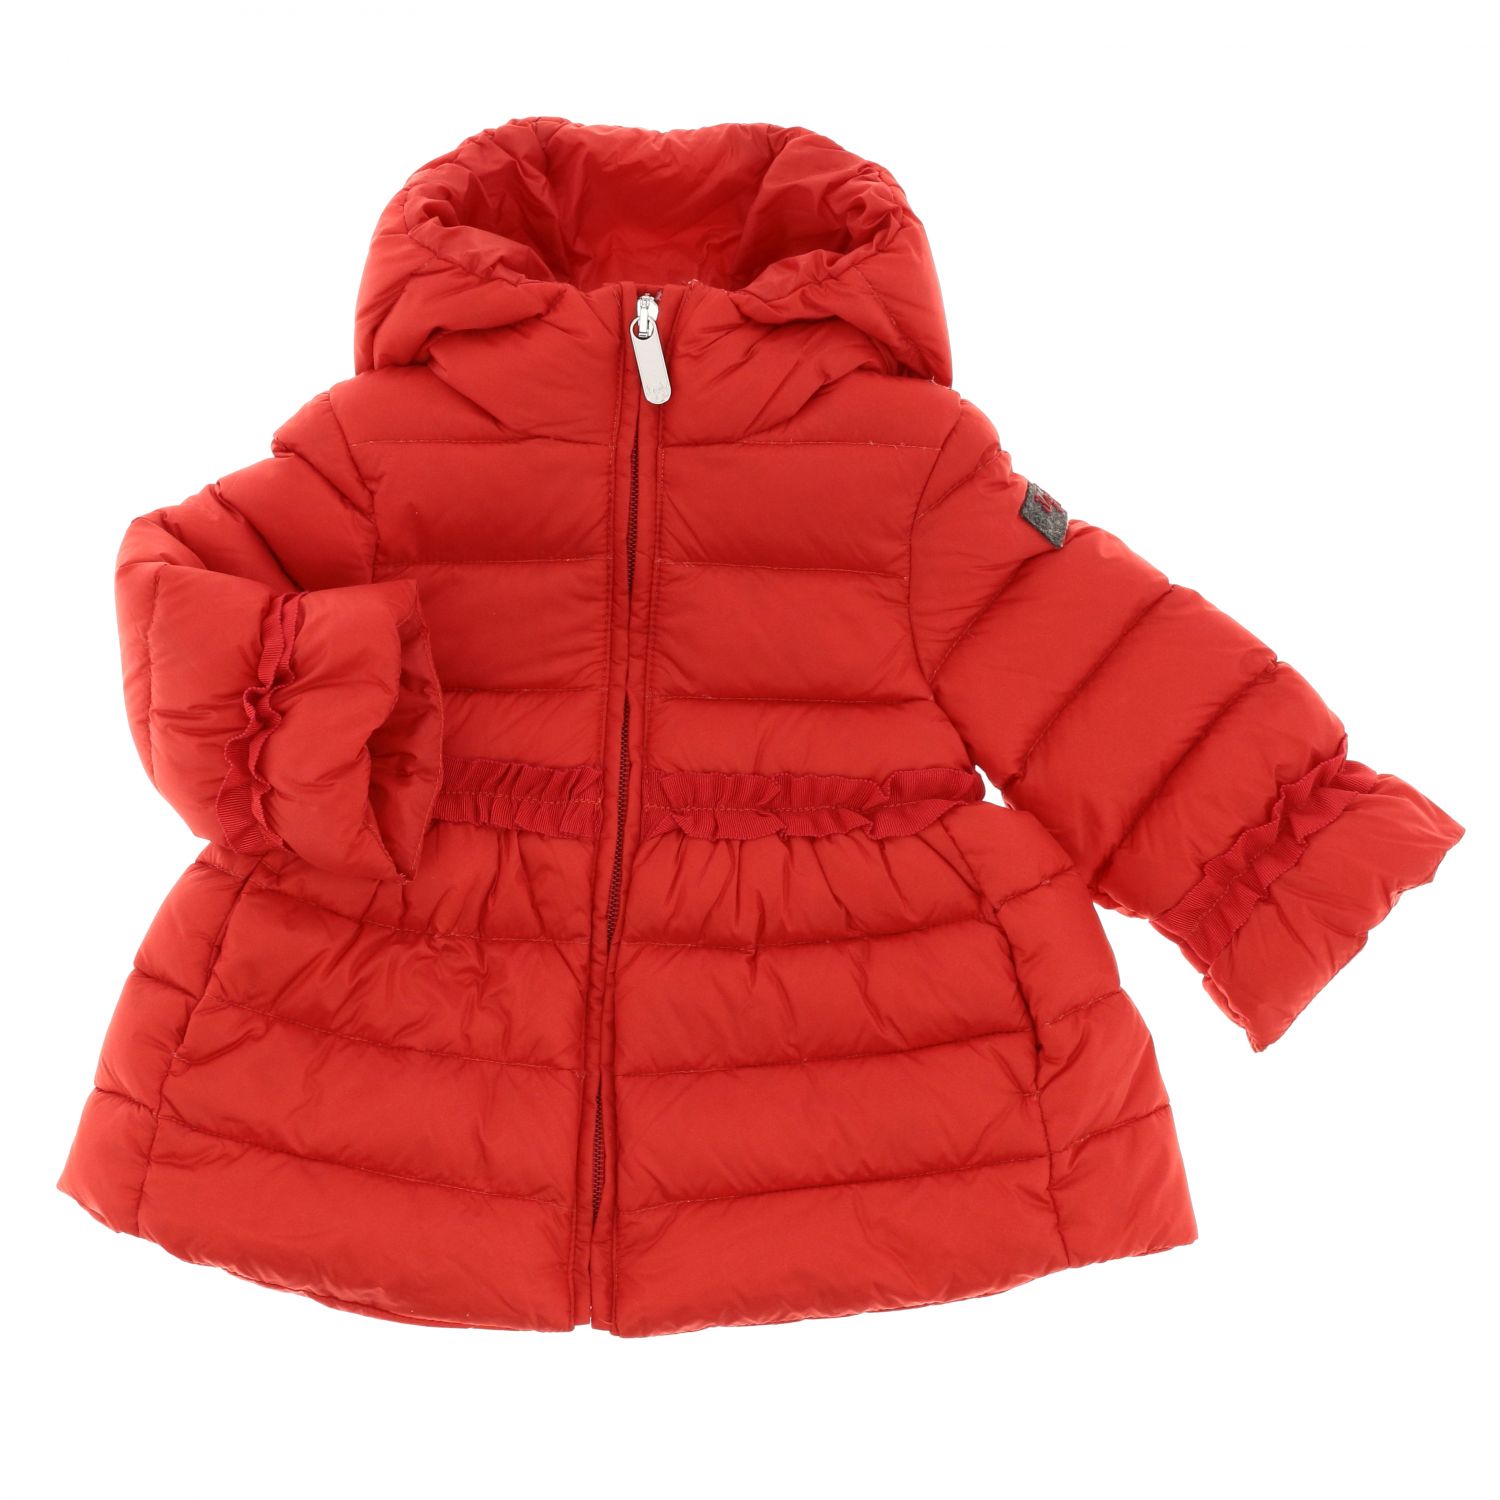 Il Gufo Outlet: Jacket kids - Red | Jacket Il Gufo GM274 N0035 GIGLIO.COM